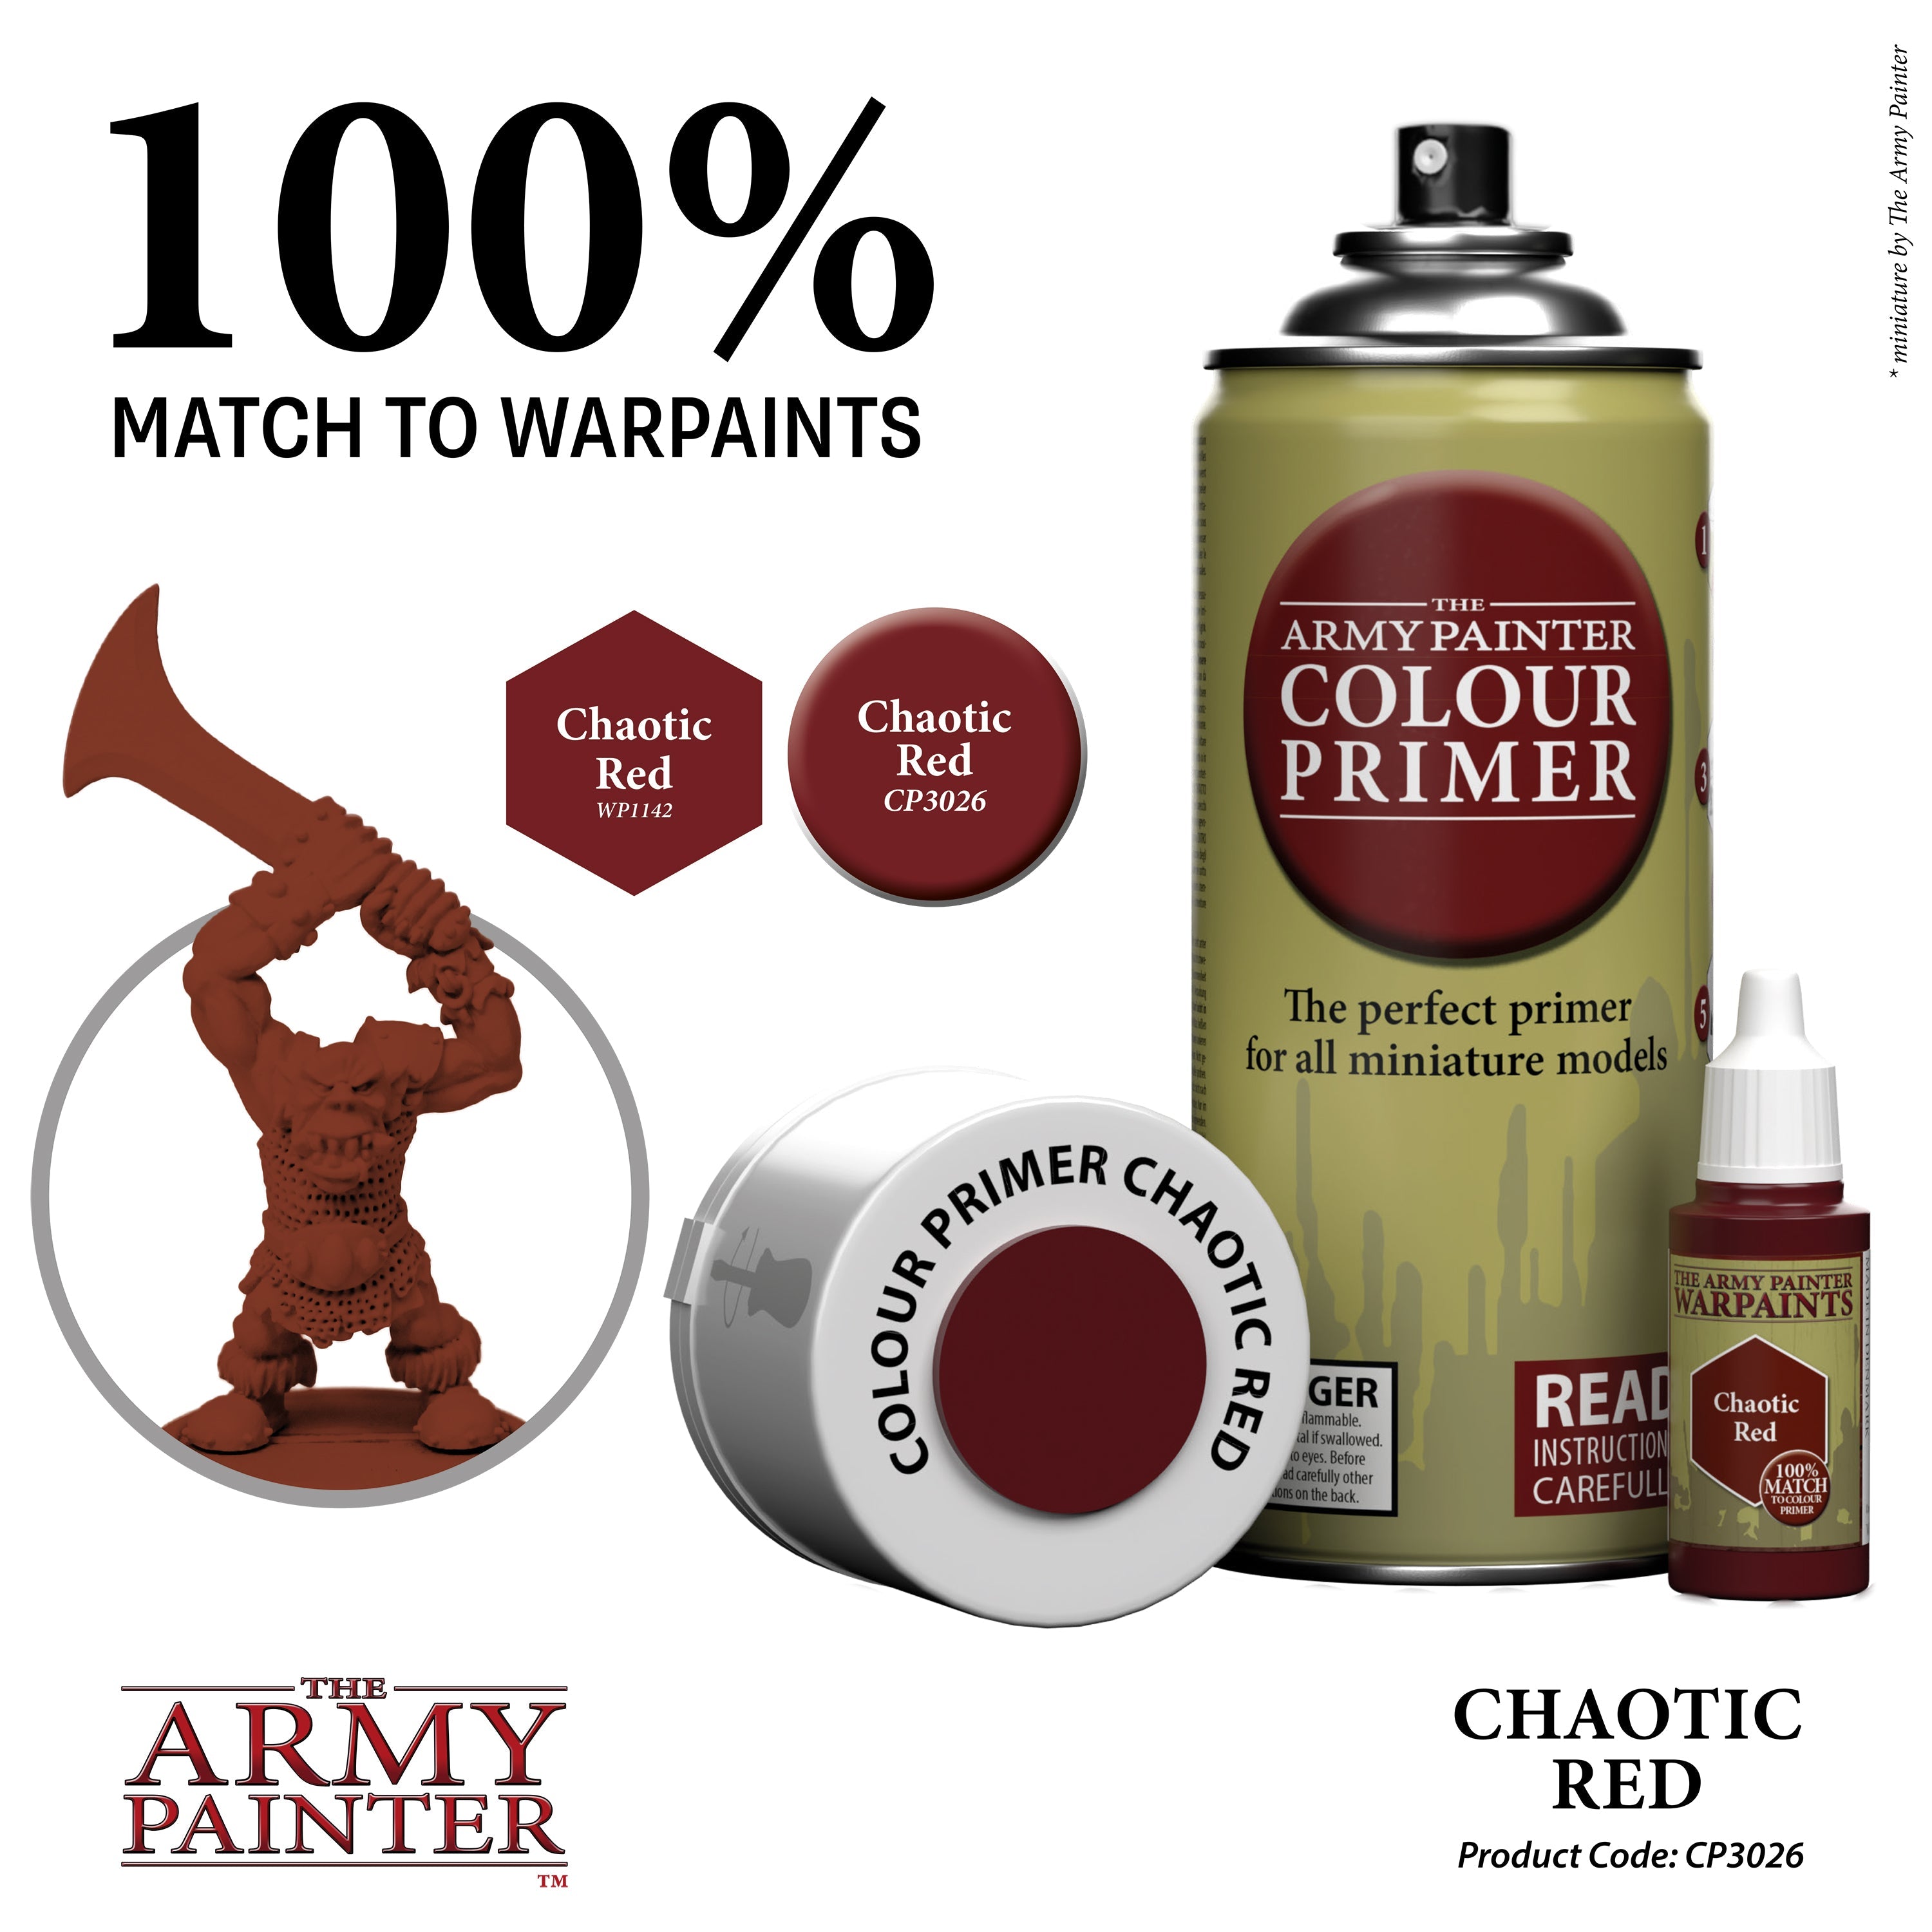 Colour Primer: Chaotic Red